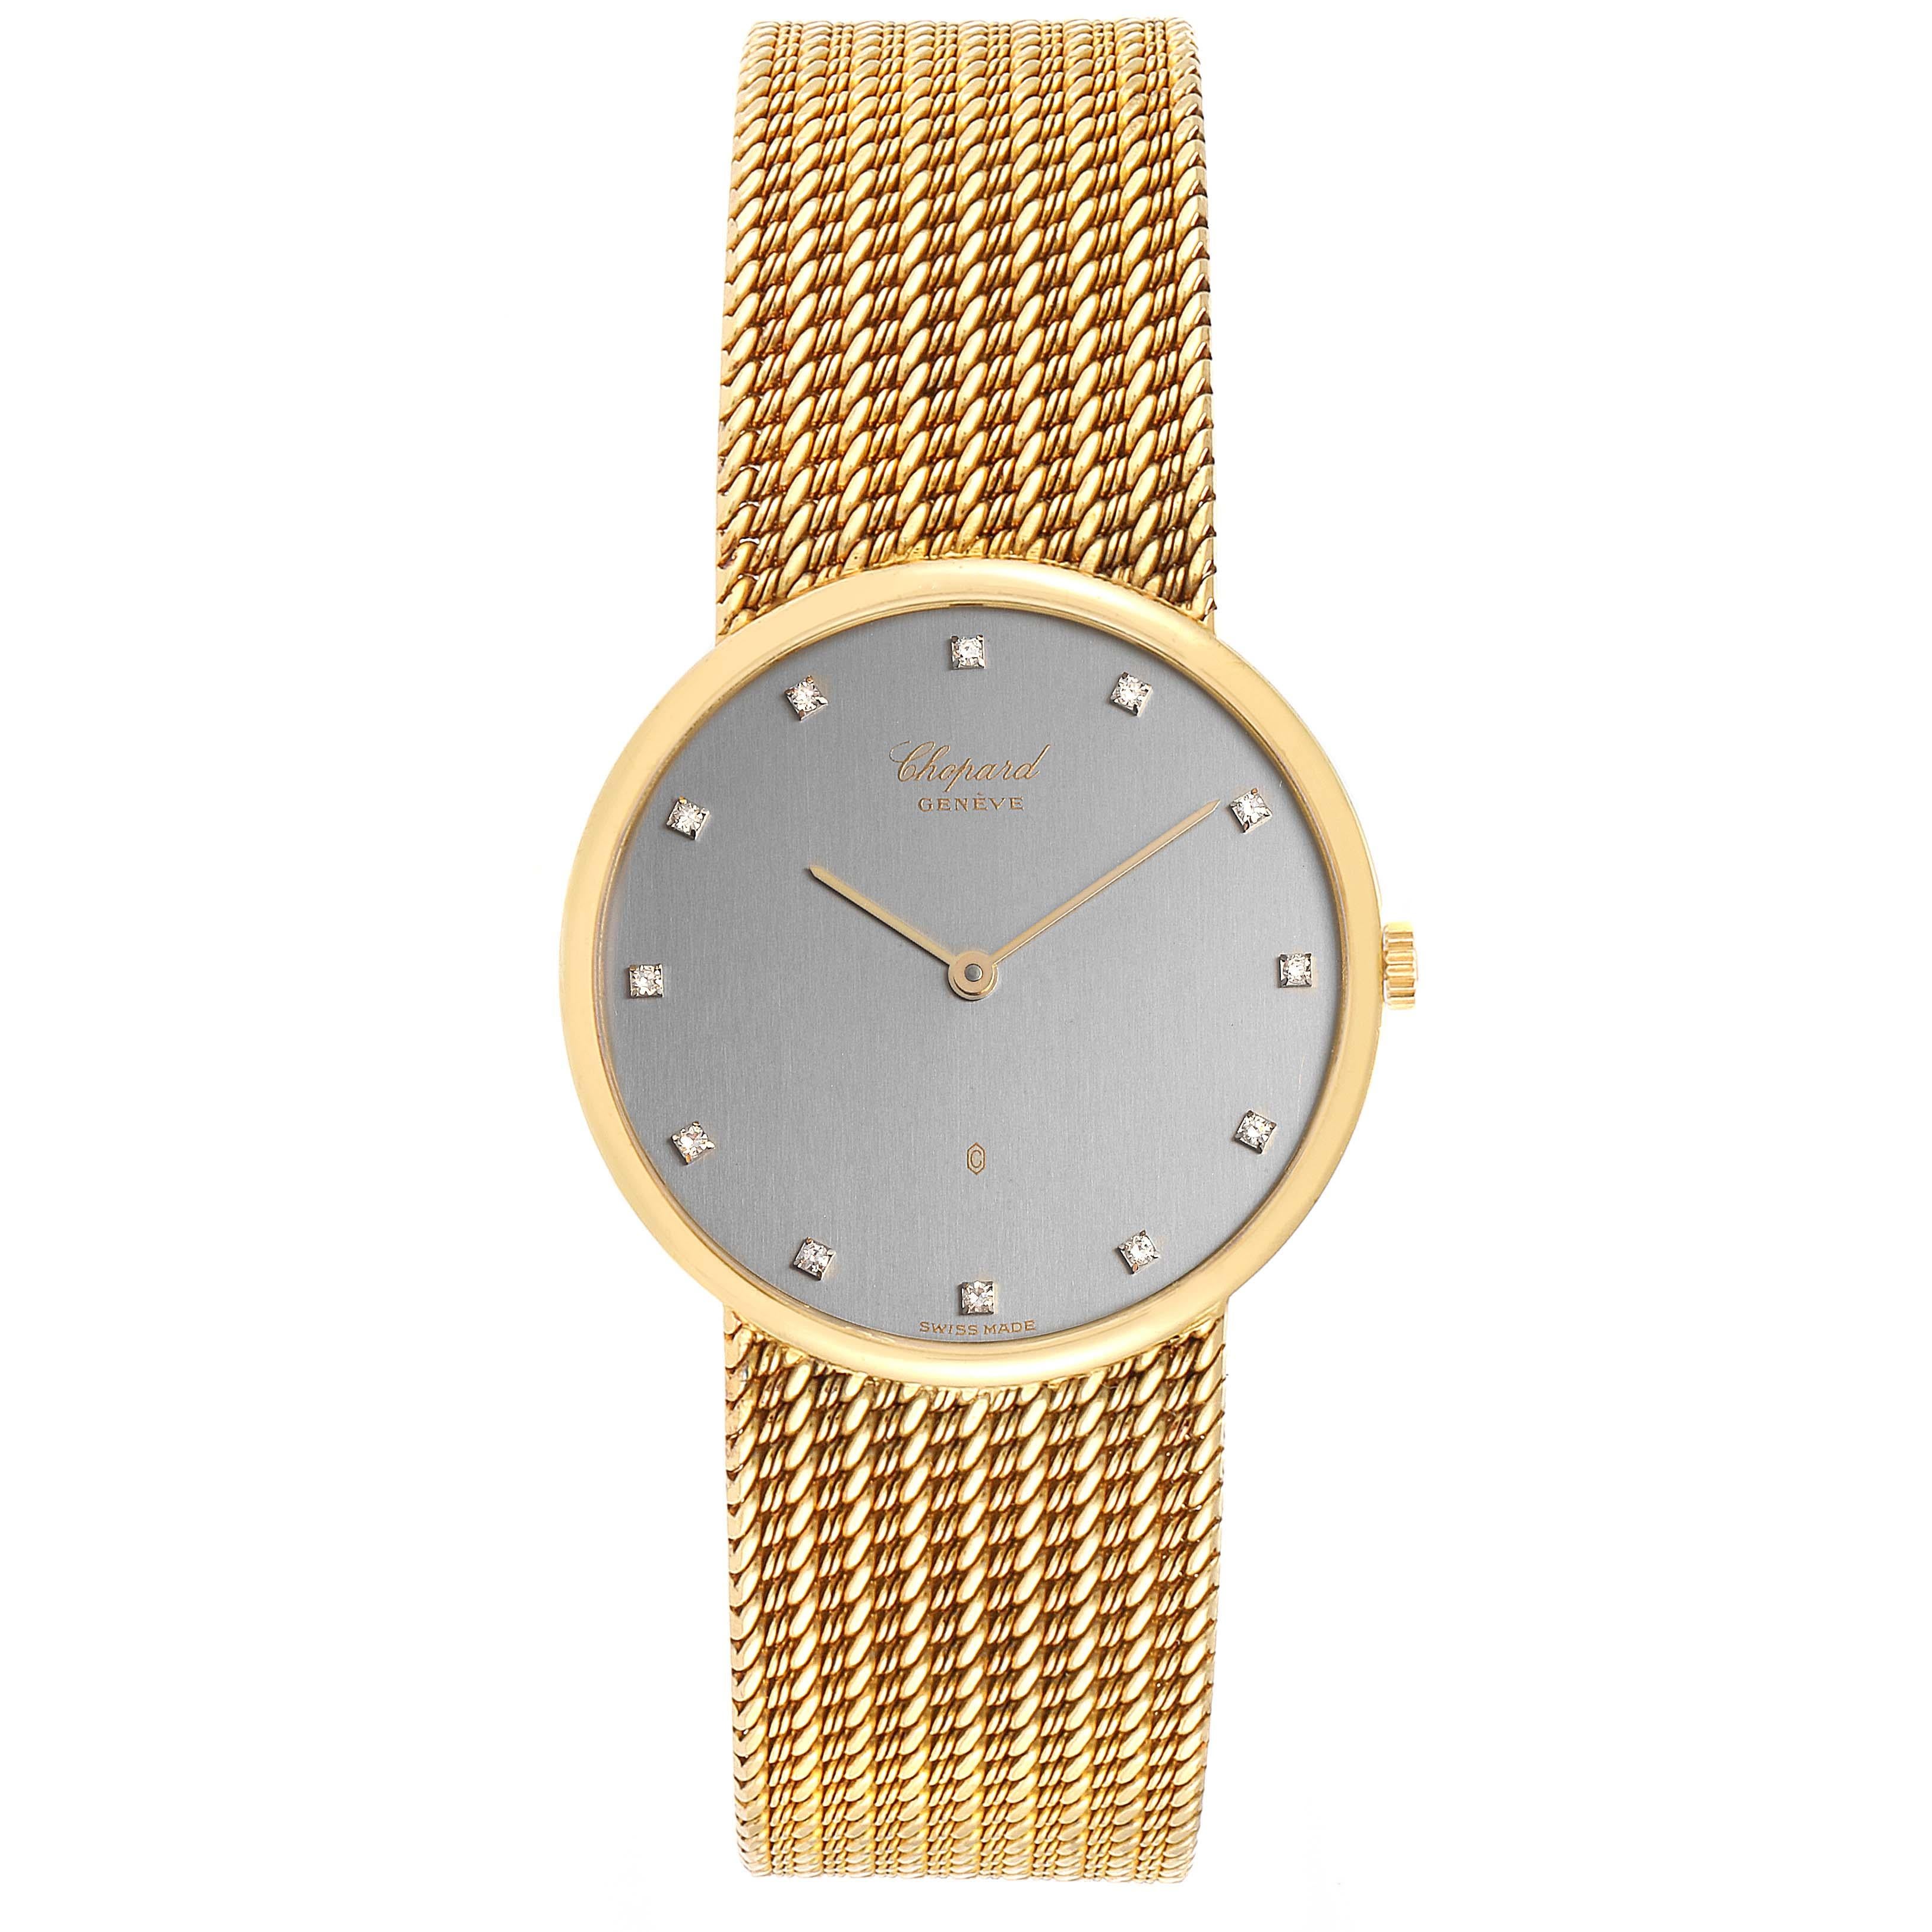 Chopard Classique 18K Yellow Gold Quartz Mens Watch 1091. Quartz movement. 18K yellow gold case 31 mm in diameter. . Mineral glass crystal. Grey dial with diamond hour markers. 18K yellow gold integrated bracelet. Fits 7.5